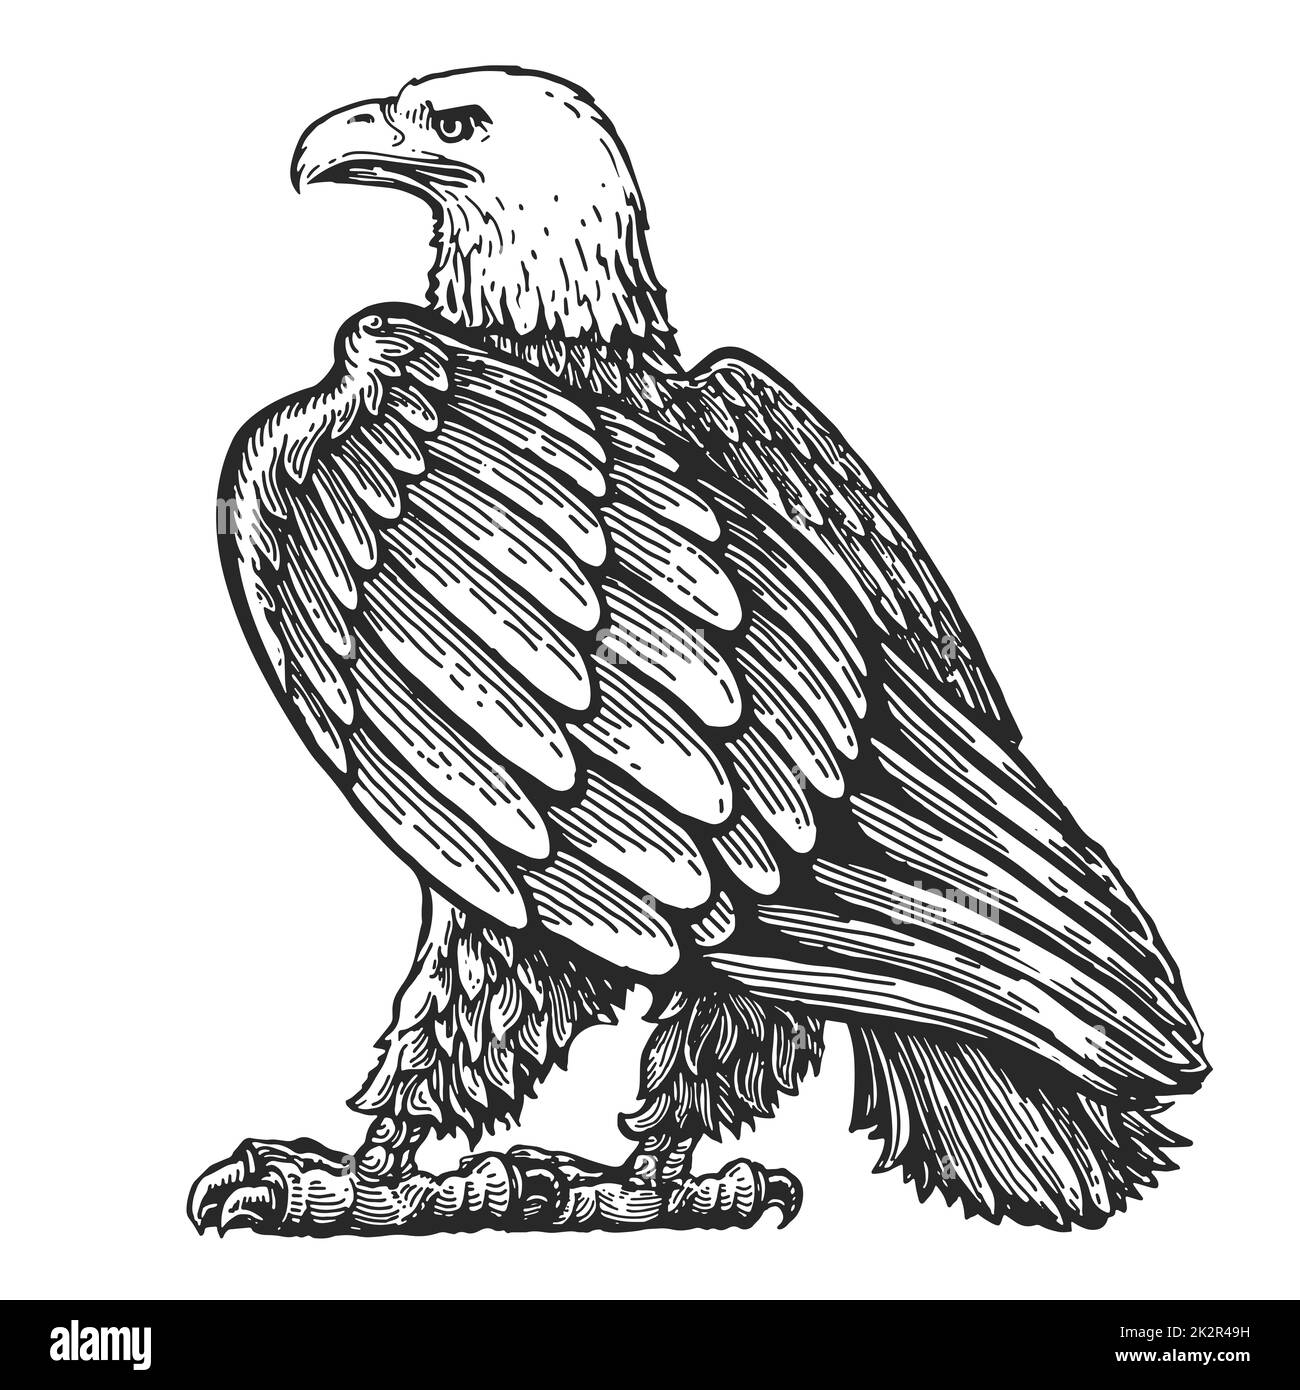 Eagle standing life size isolated on white. Hand drawn sketch animal bird illustration in vintage engraving style Stock Photo